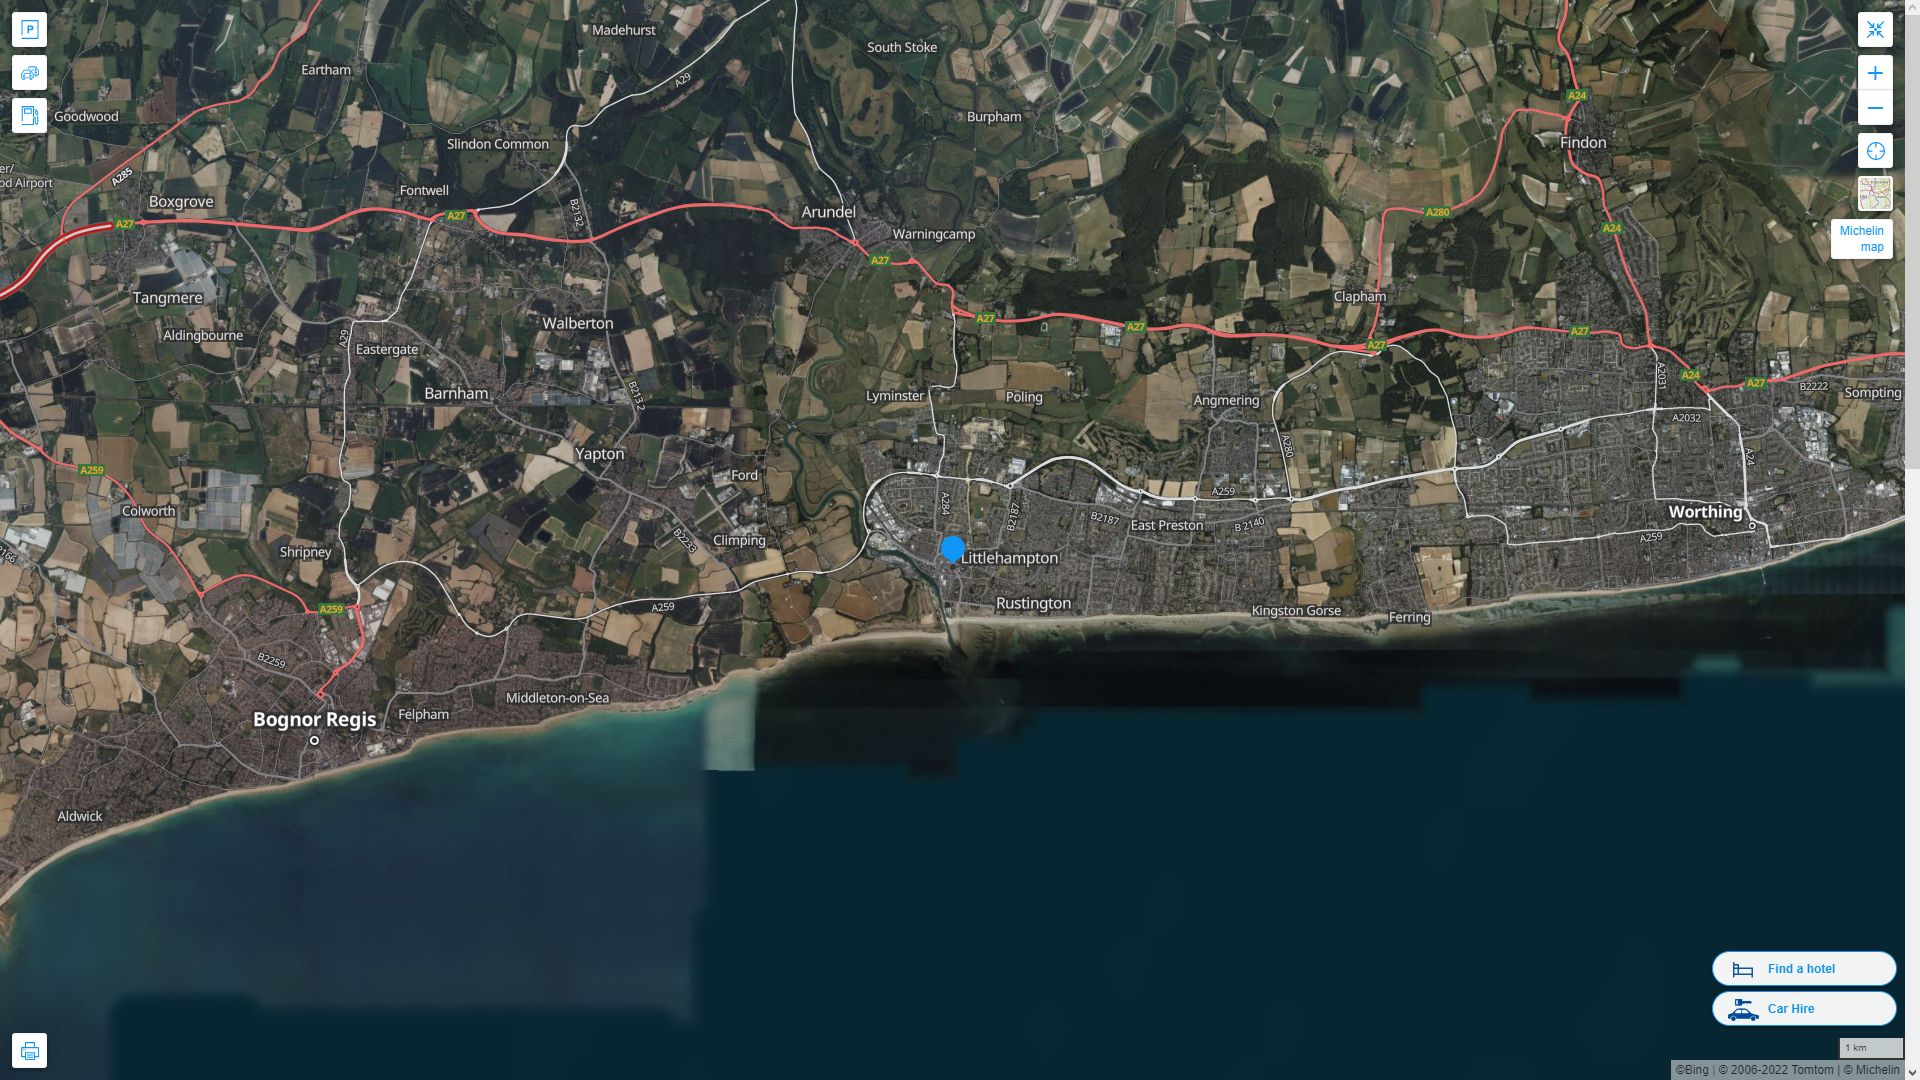 Littlehampton Highway and Road Map with Satellite View